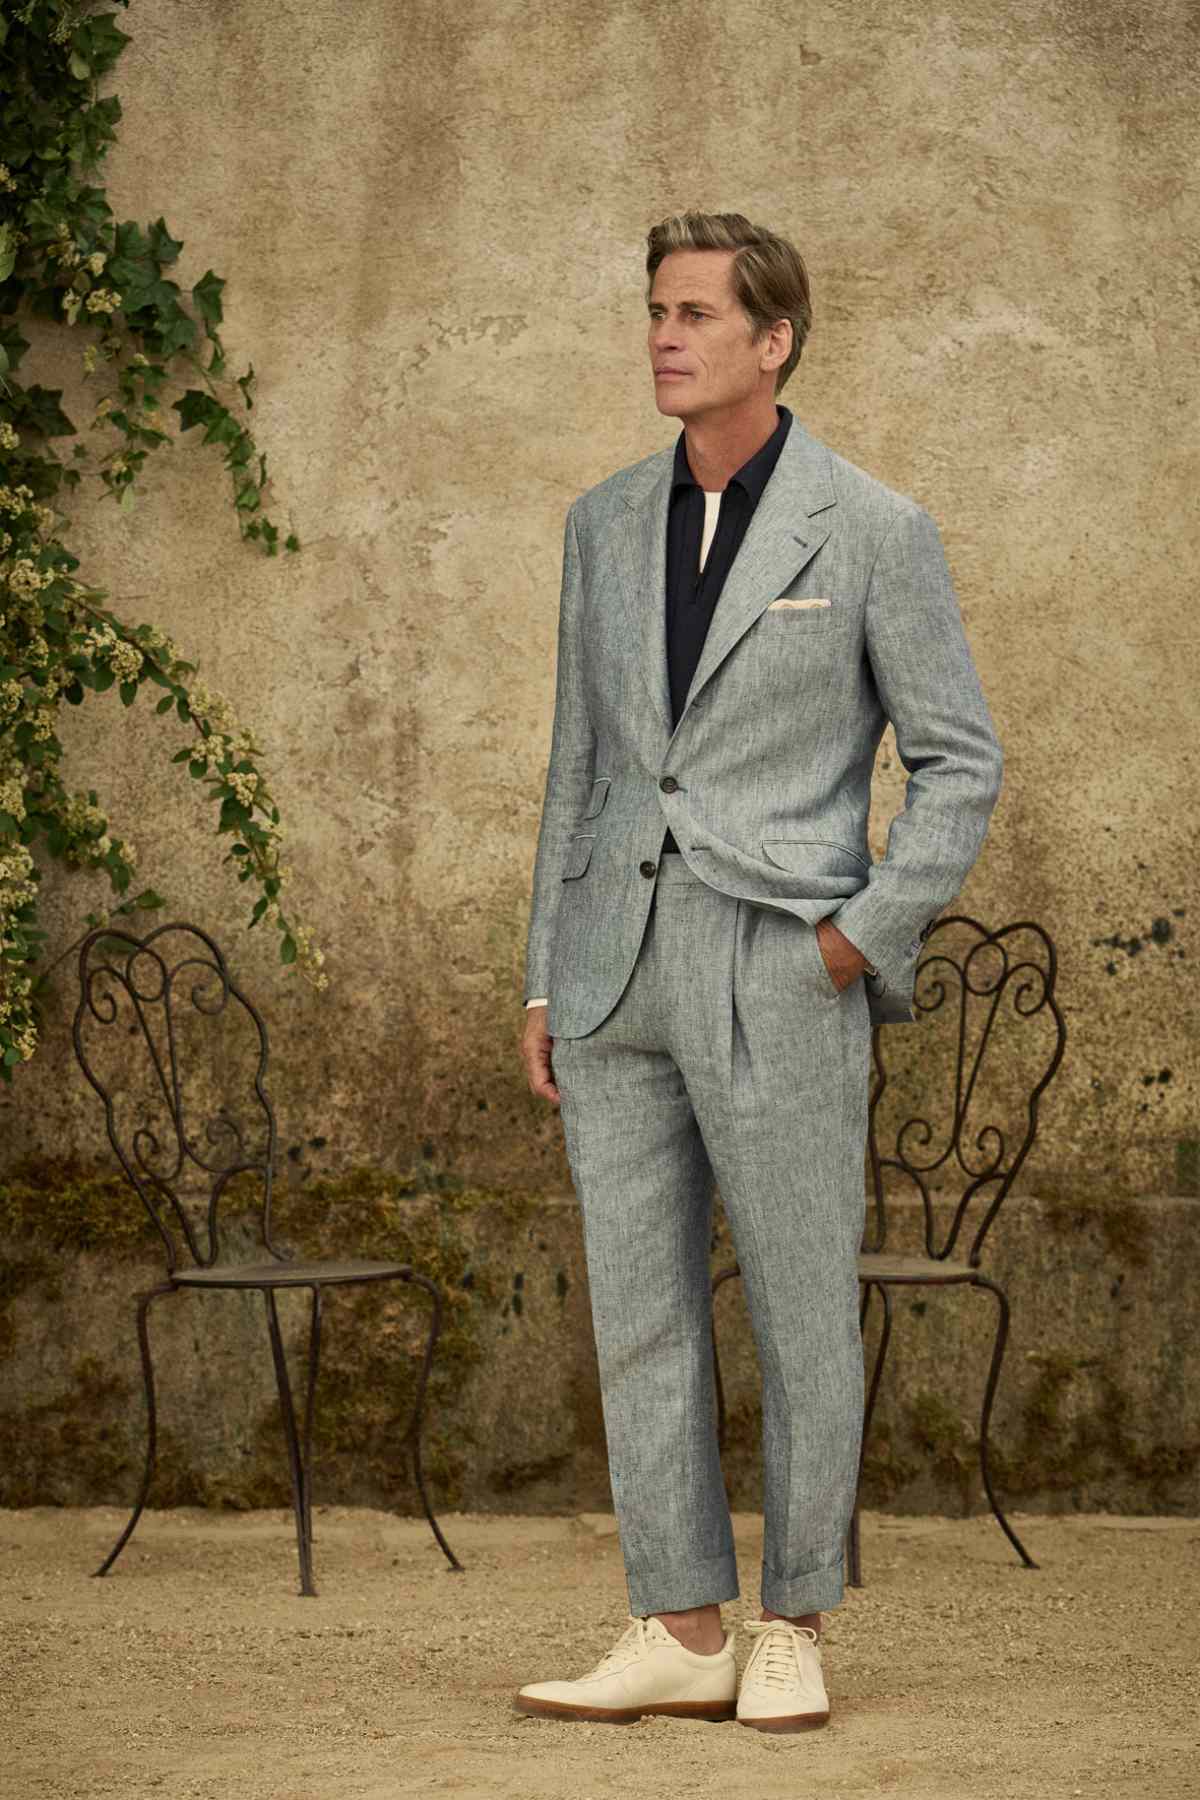 Brunello Cucinelli Presents Its New Men’s Spring Summer 2022 Collection: Simplicity In Elegance